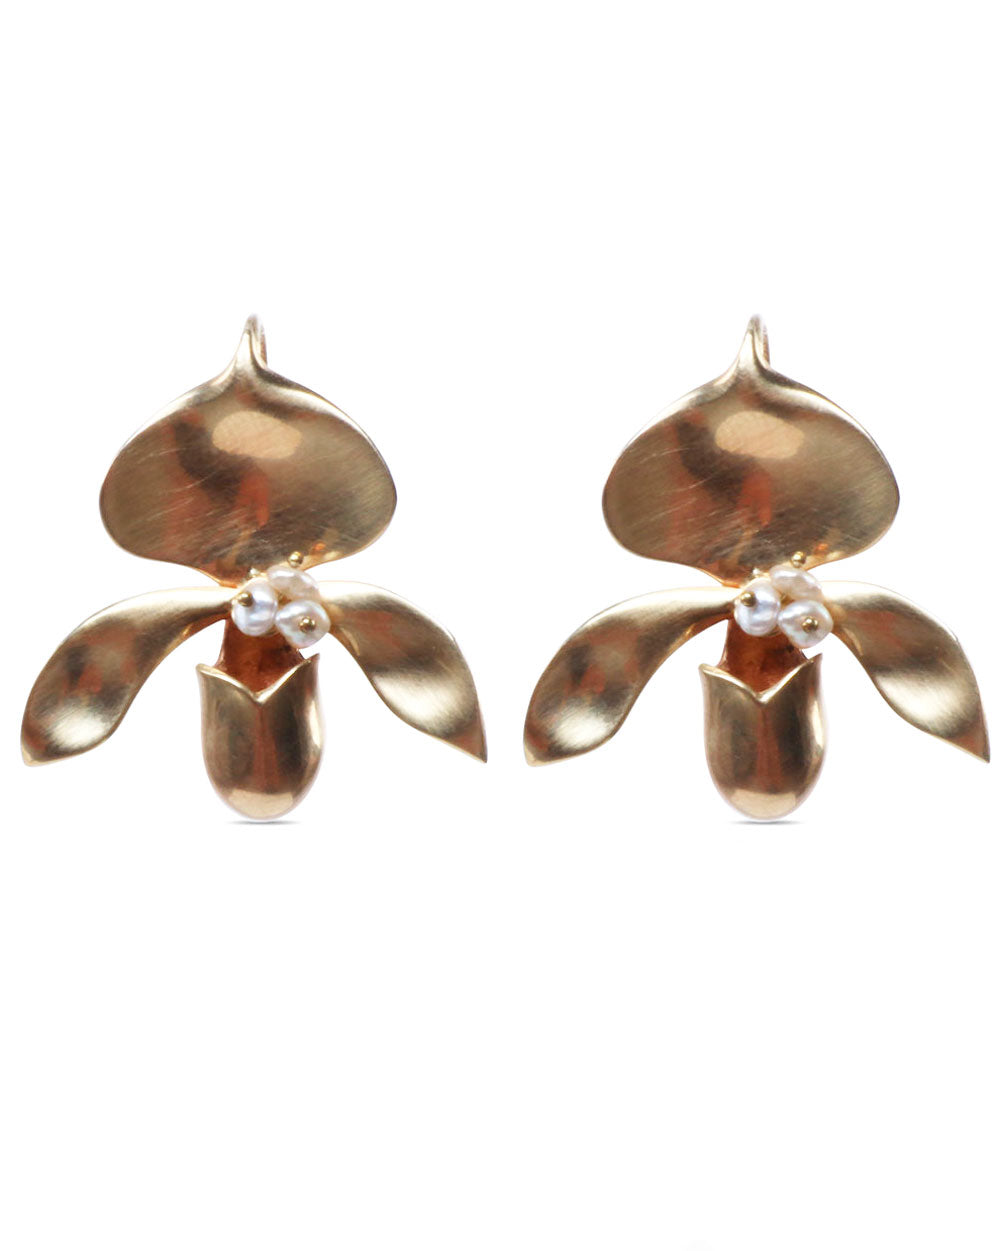 Lady Slipper Orchid and Pearl Earrings